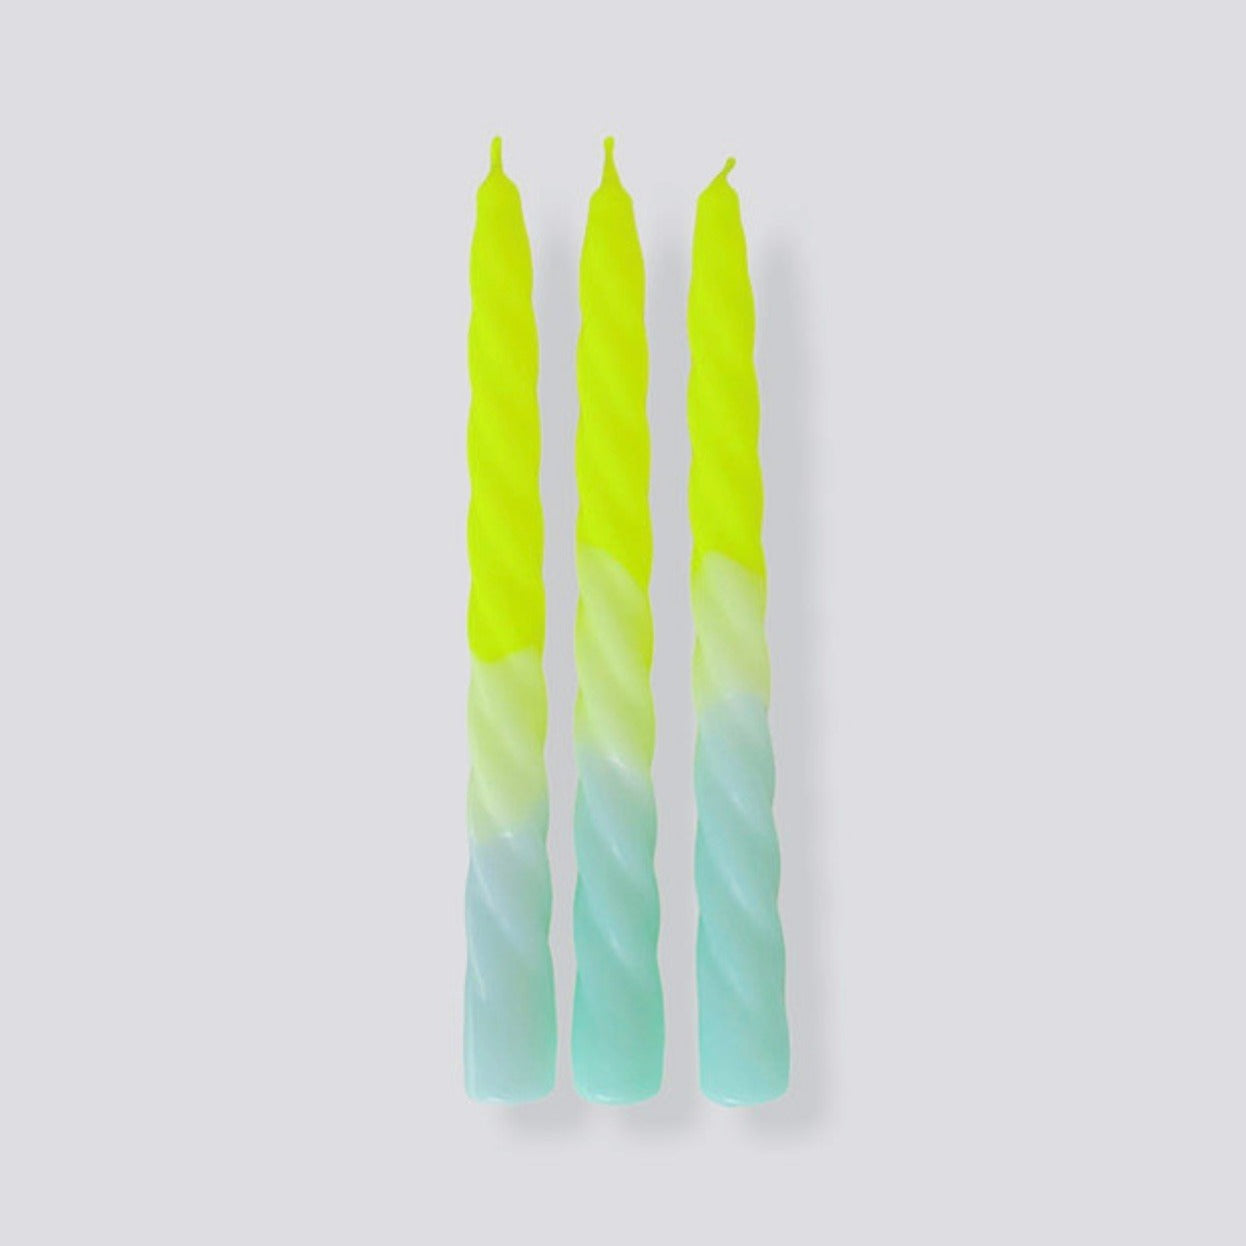 yellow and blue dipped dyed twisted candles